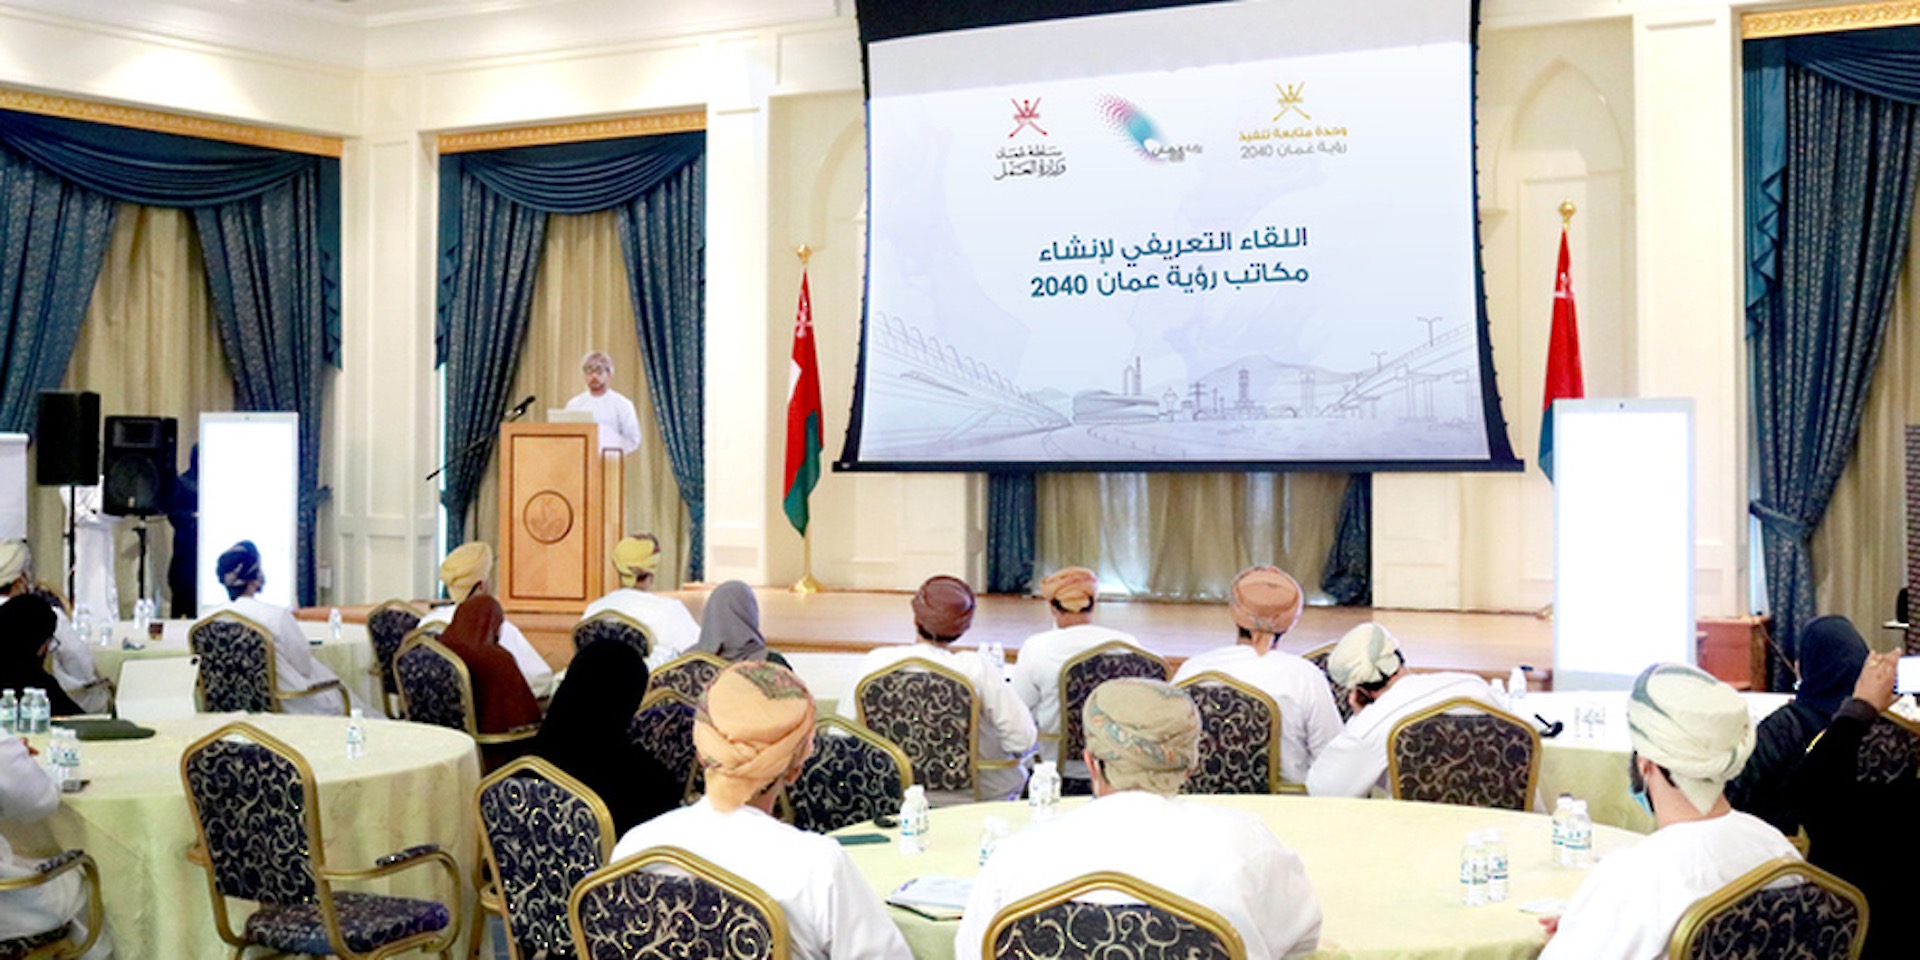 Meeting held to familiarize government units with Oman 2040 Vision